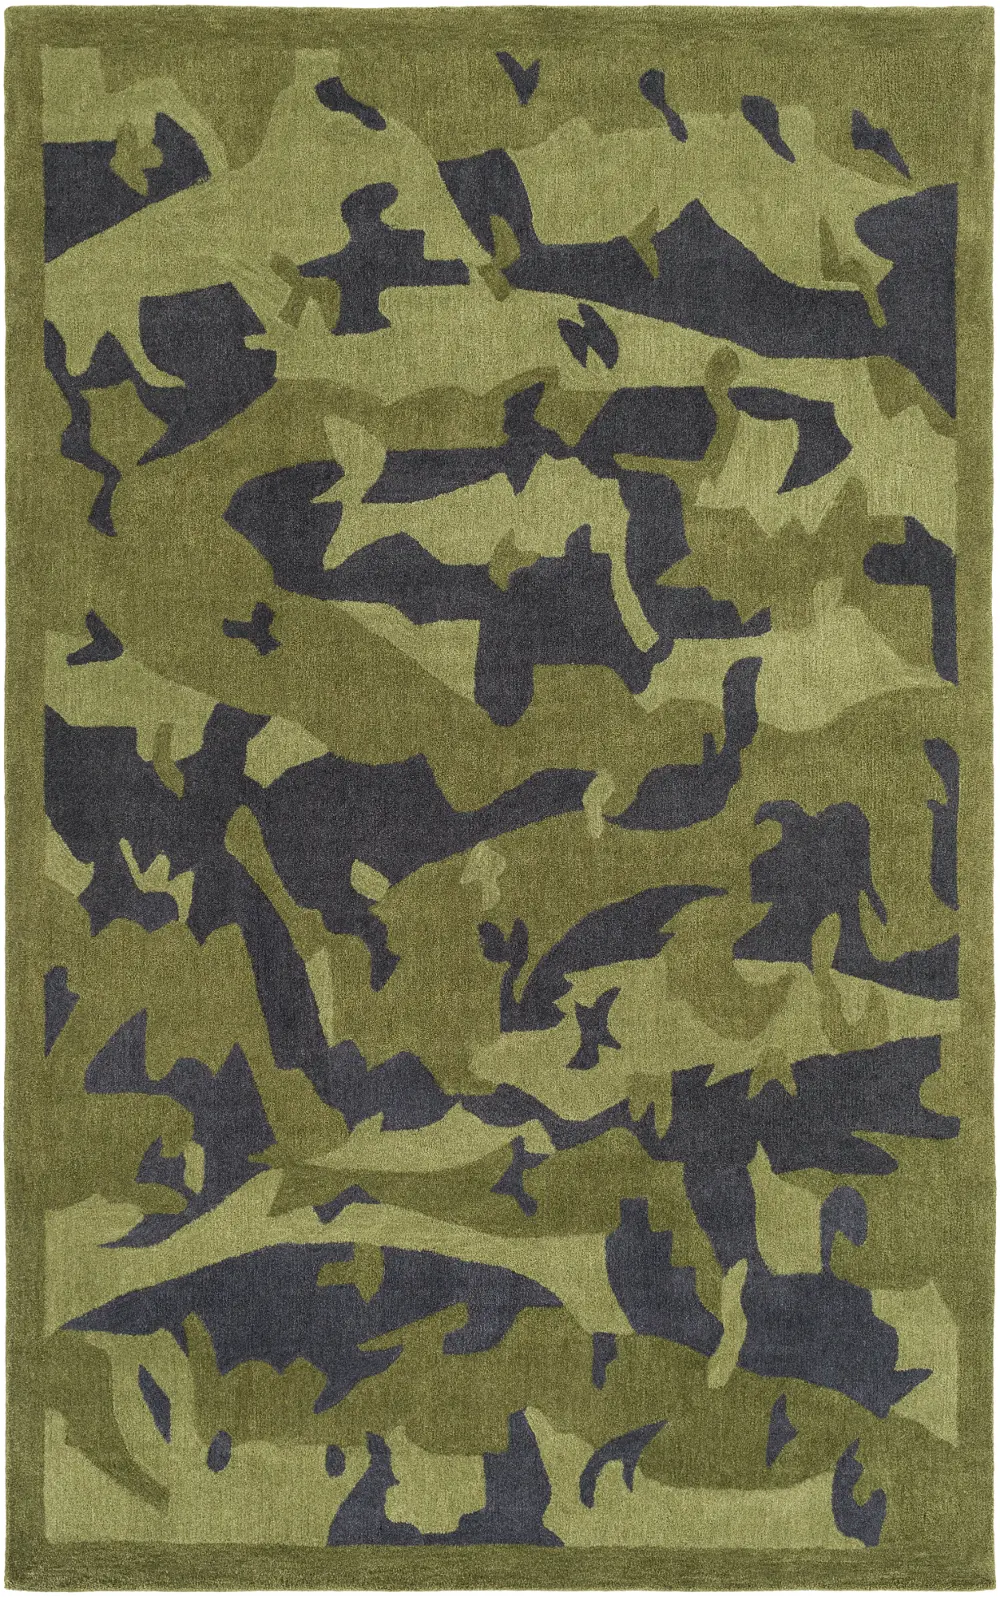 3 x 5 Small Olive Green Area Rug - Leap Frog-1